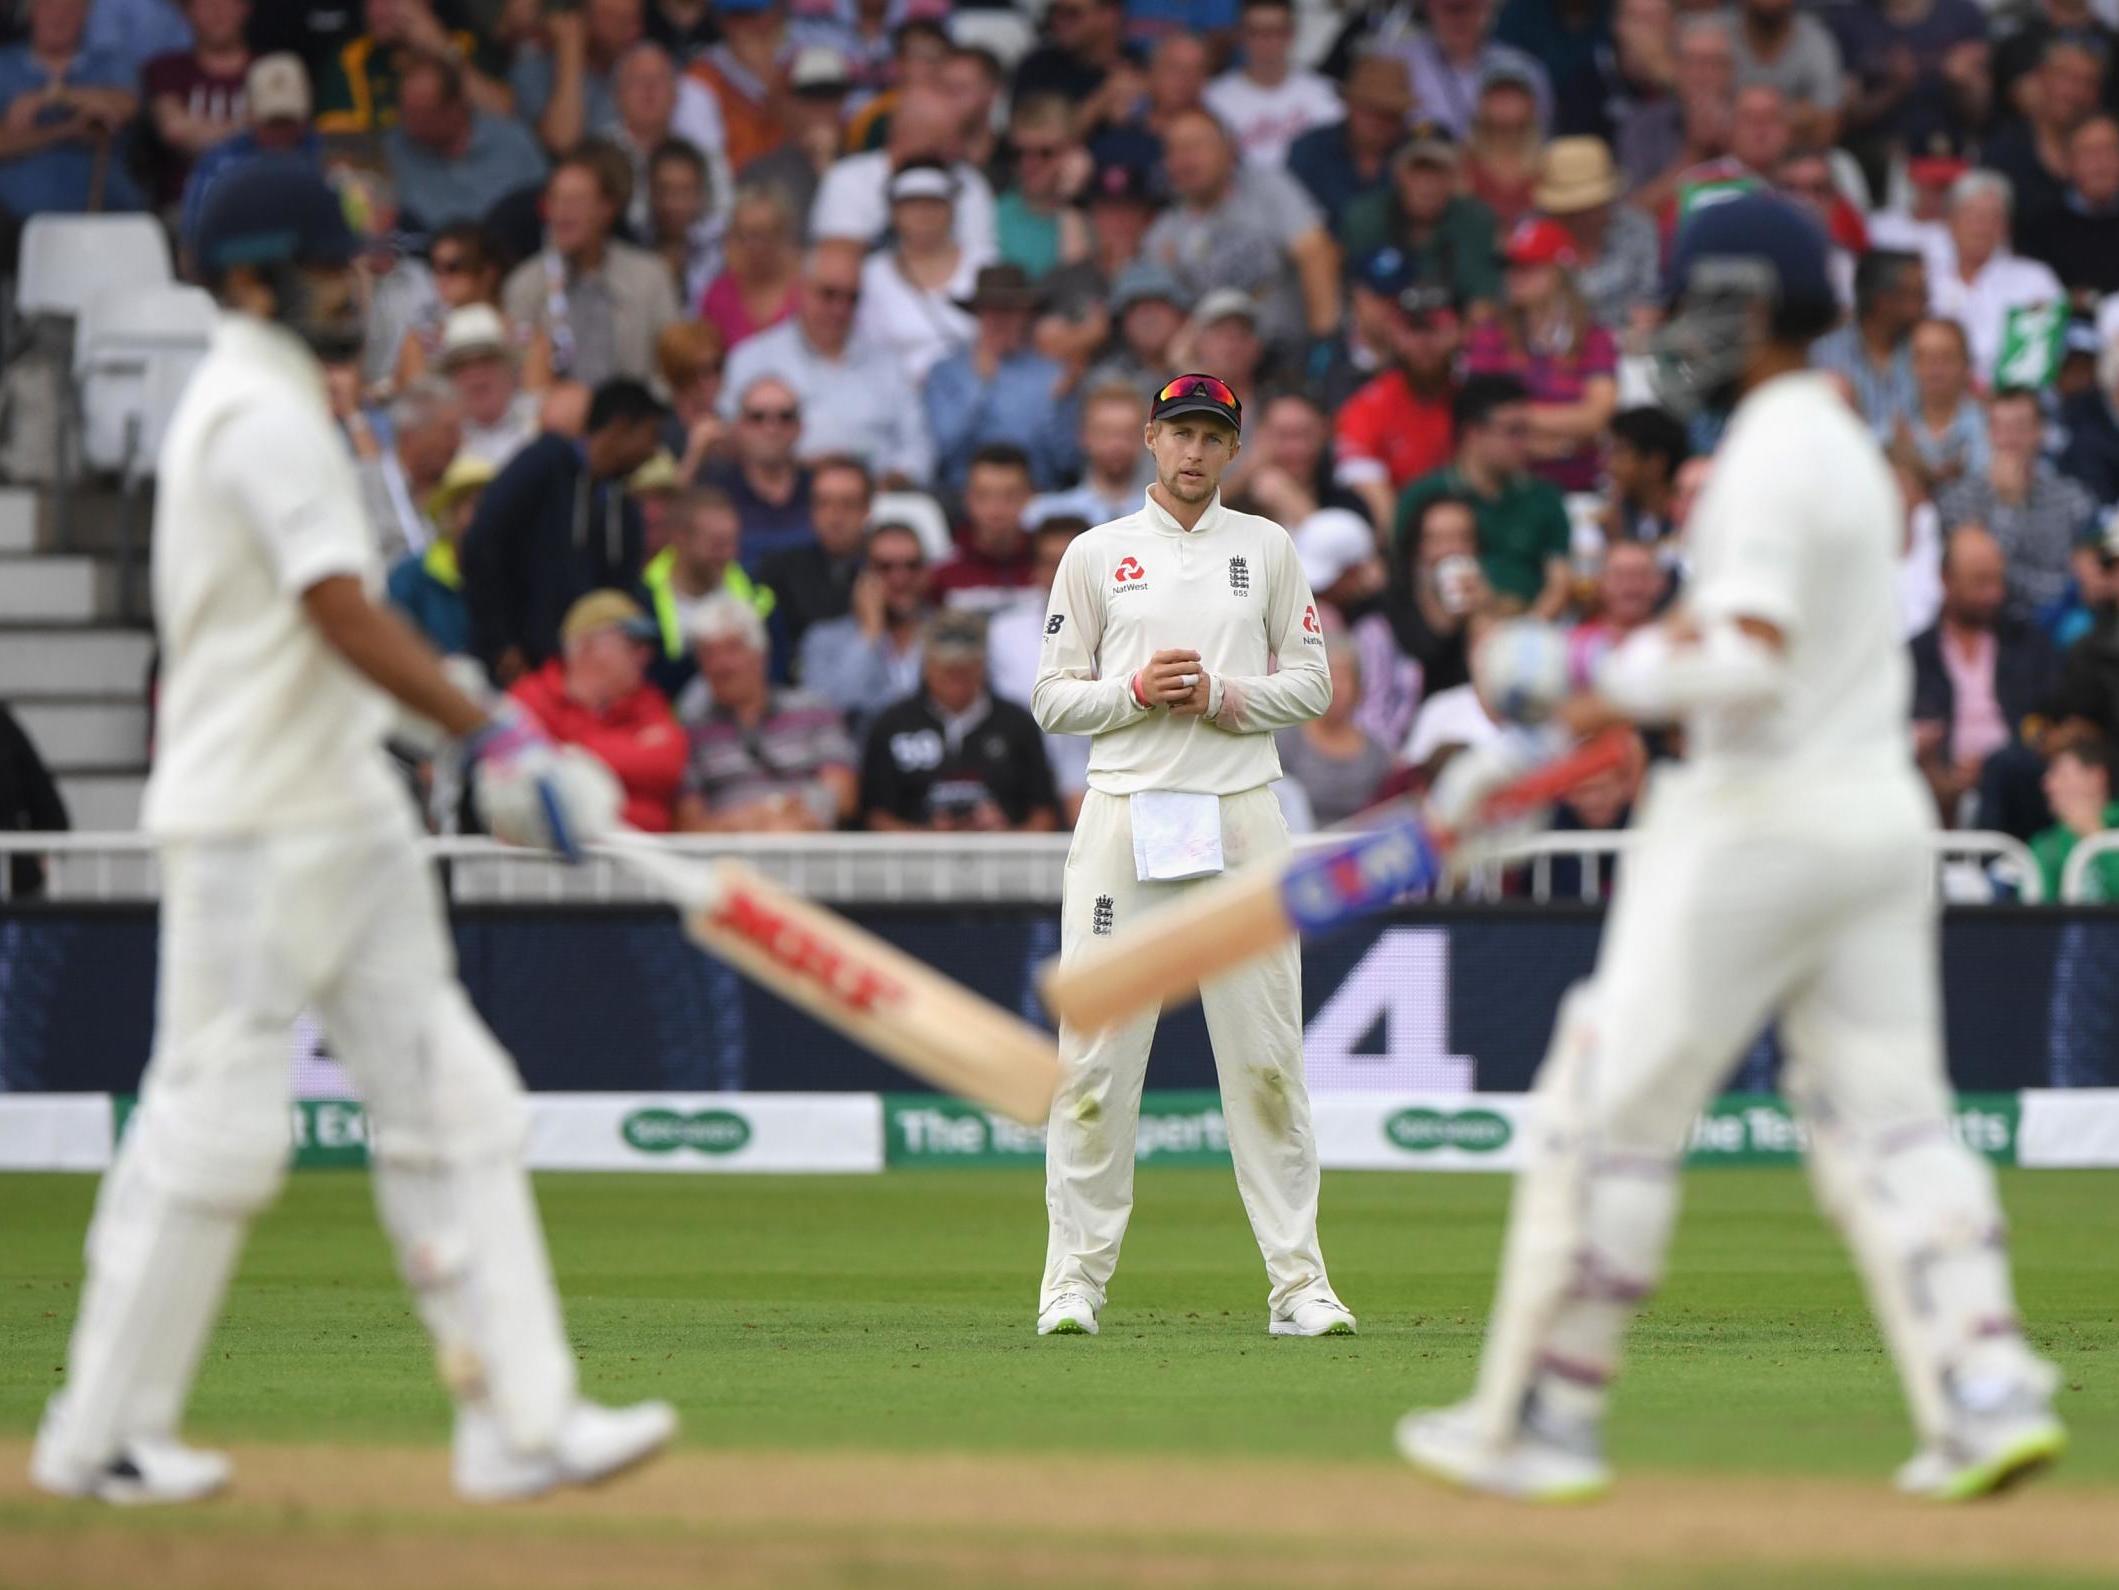 Joe Root's men are staring defeat in the face in this third Test